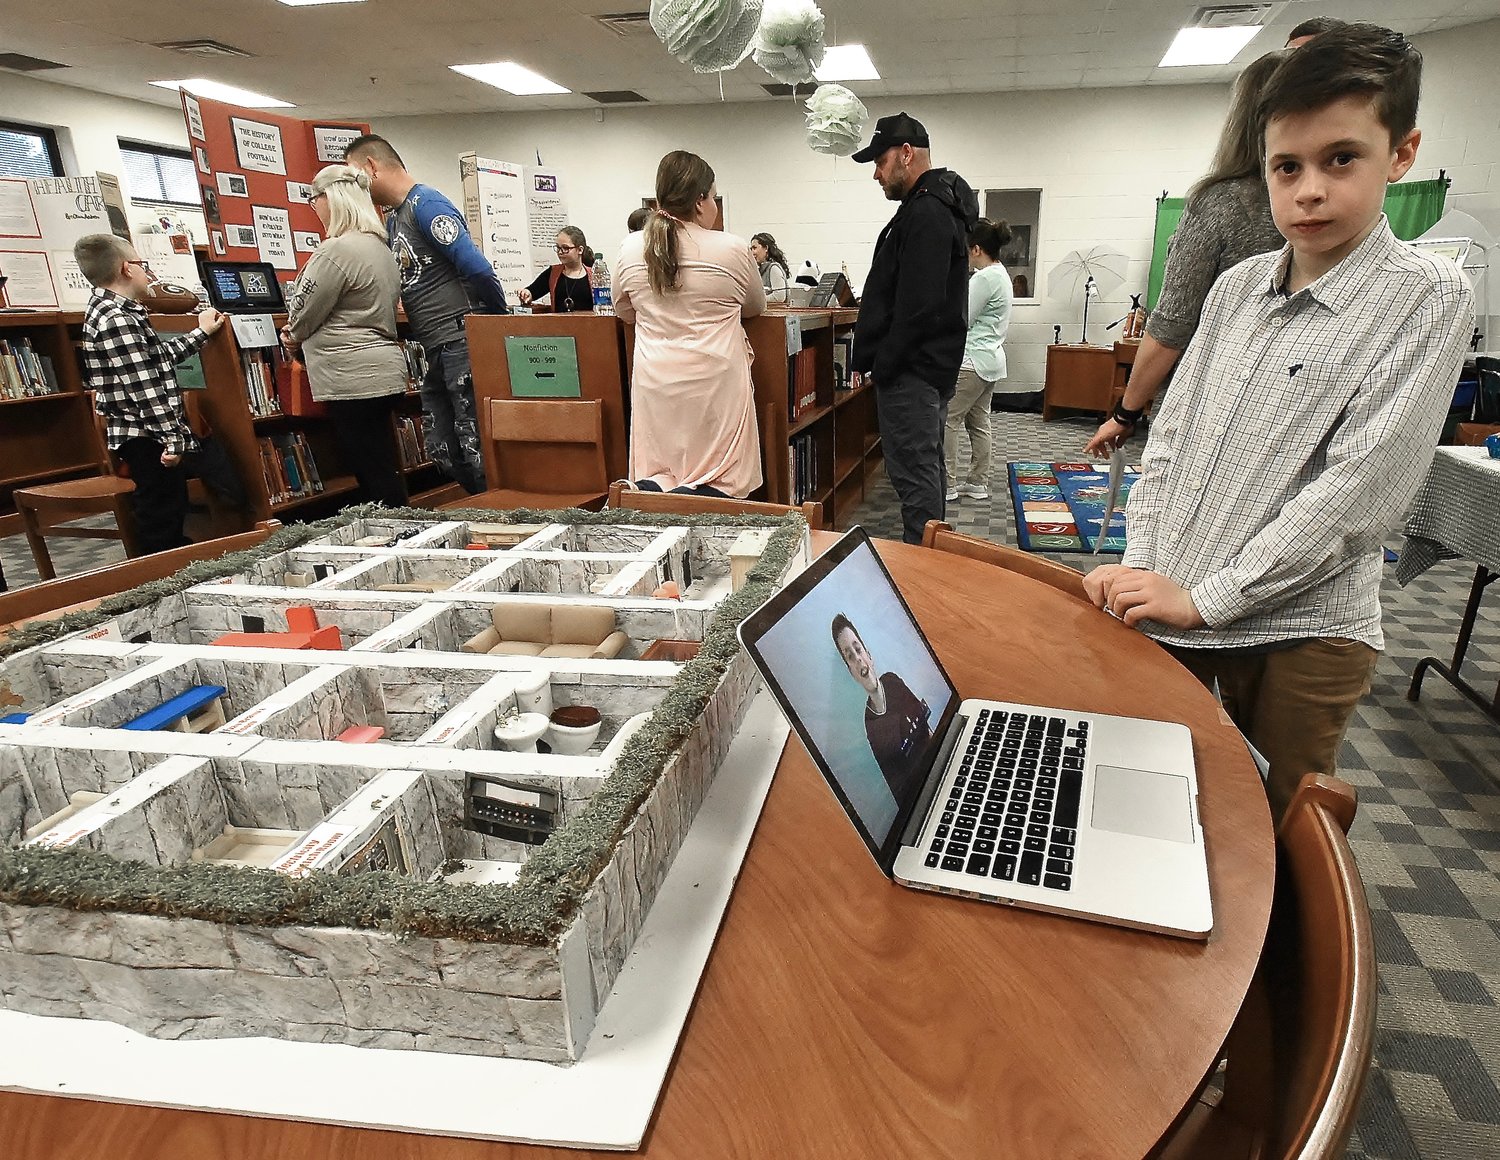 Cloverleaf GATEWAY students show off their passions at Genius Hour Expo - Daily Tribune News